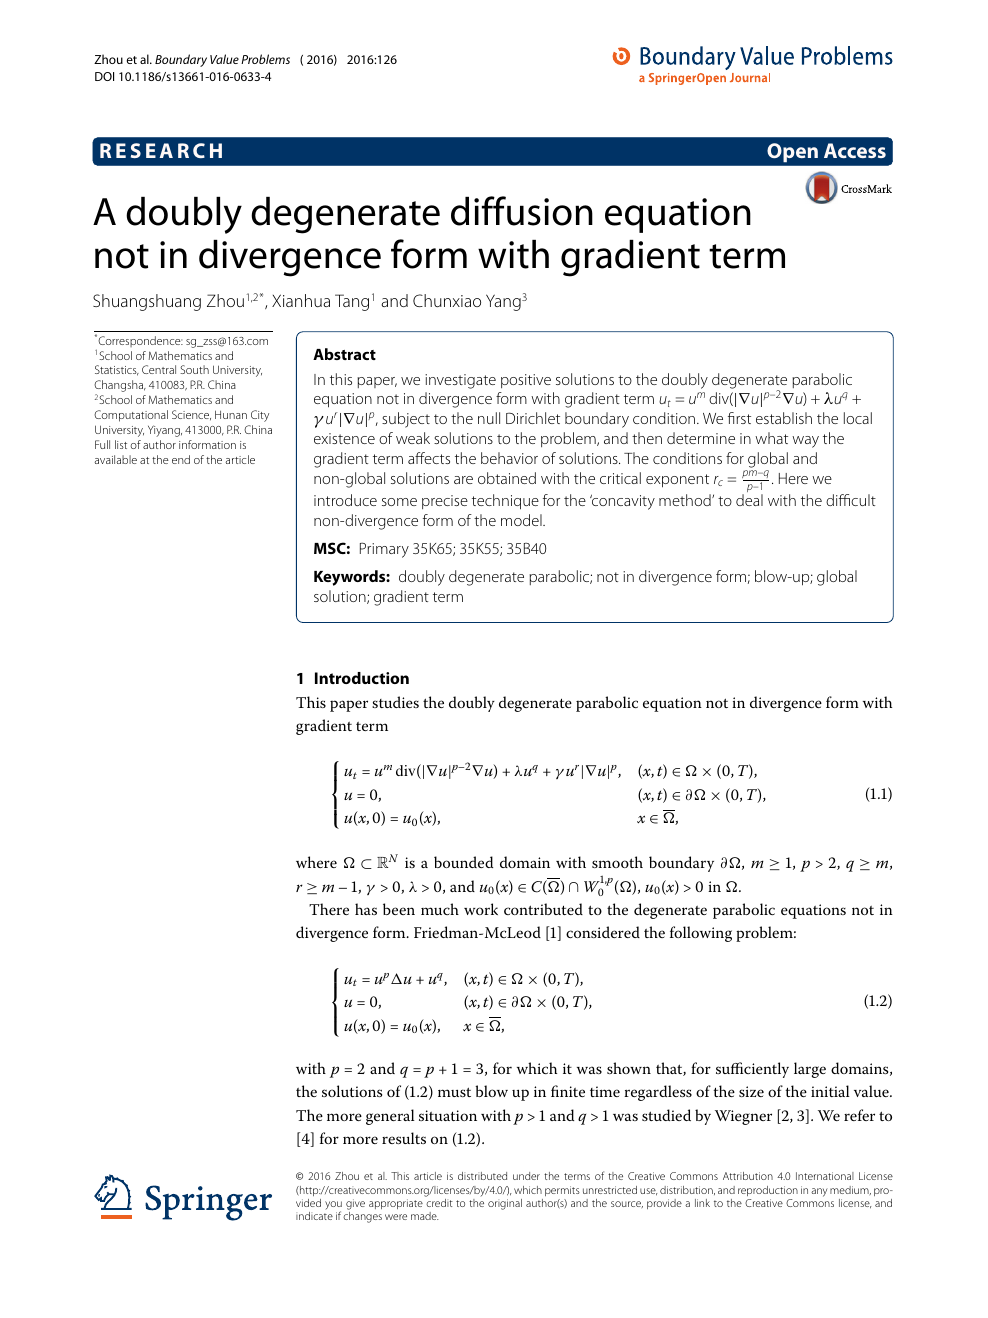 A Doubly Degenerate Diffusion Equation Not In Divergence Form With Gradient Term Topic Of Research Paper In Mathematics Download Scholarly Article Pdf And Read For Free On Cyberleninka Open Science Hub